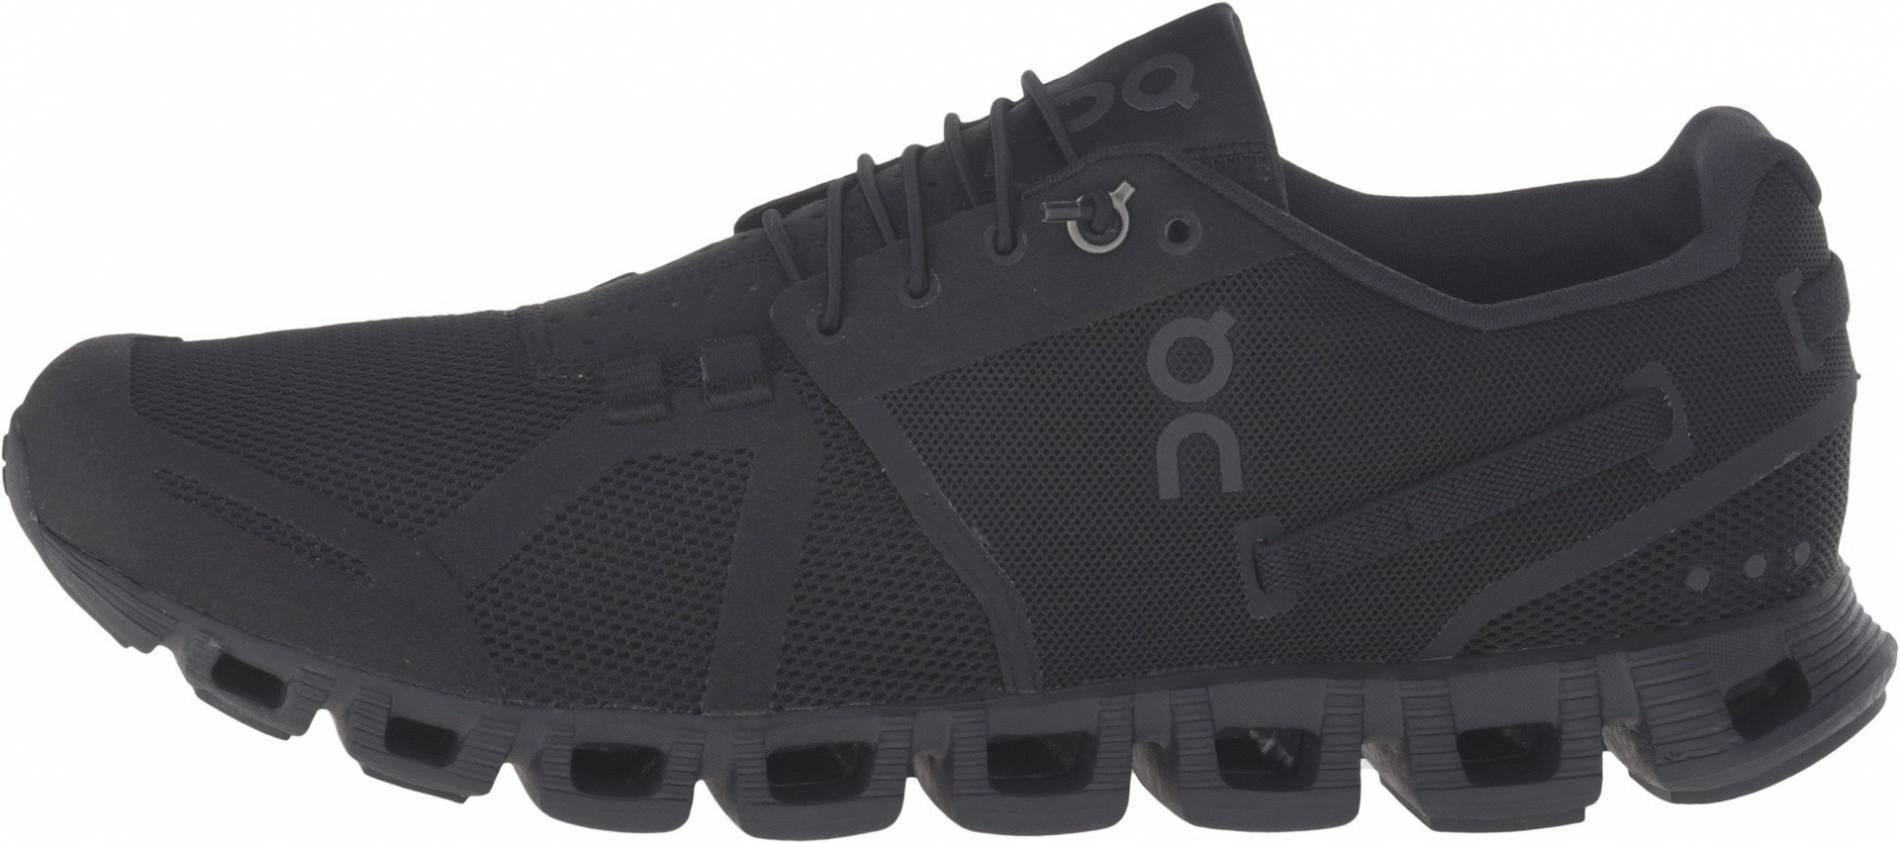 on cloud running shoes discount